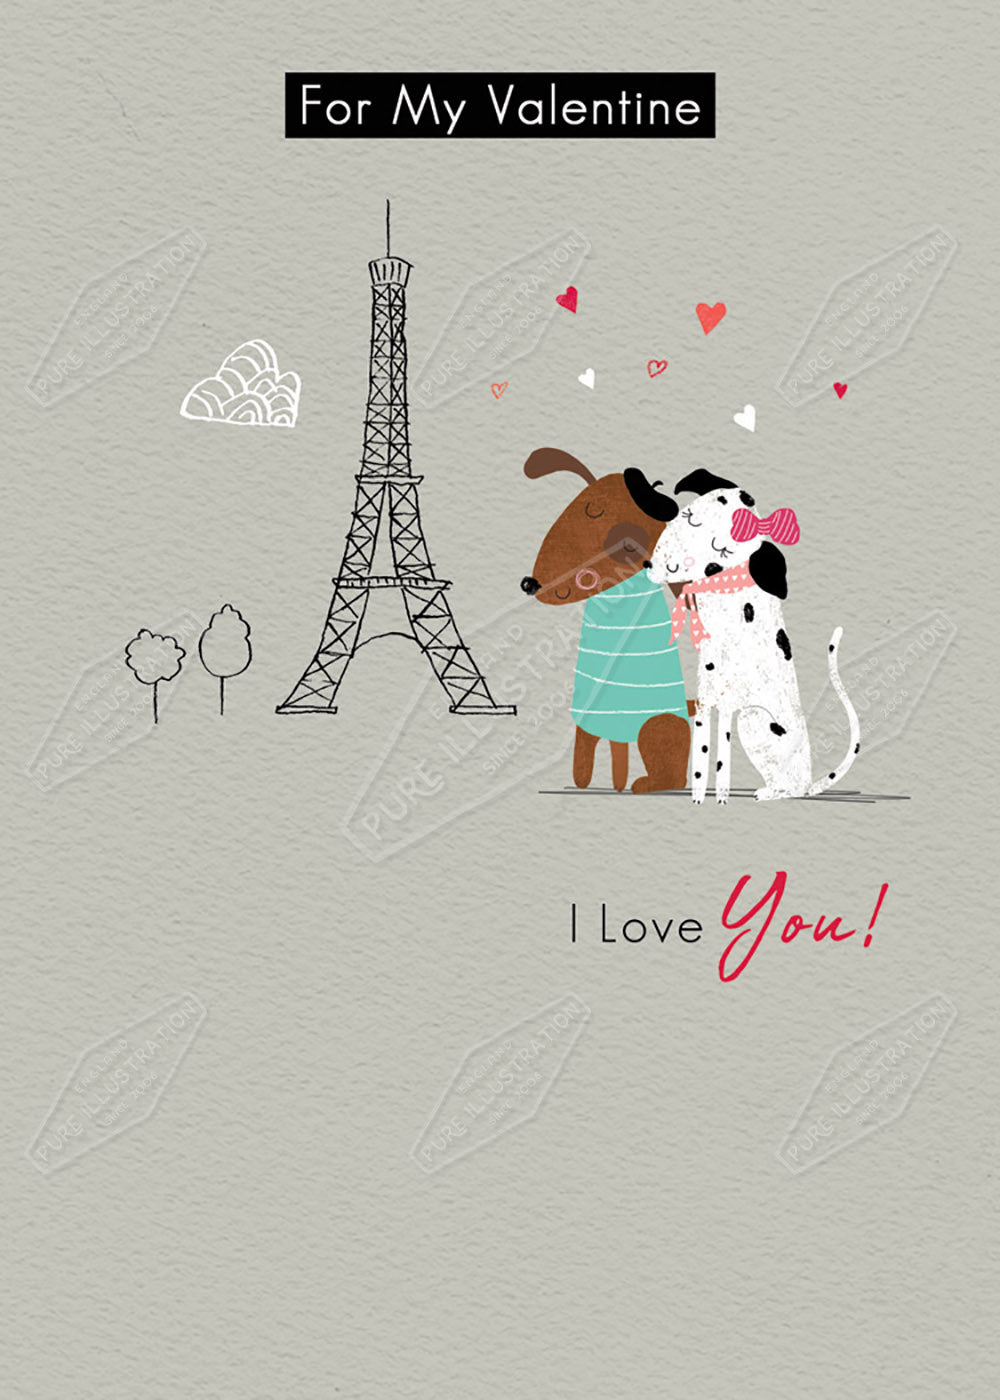 Valentines Paris Greeting Card Design by Cory Reid for Pure Art Licensing Agency & Surface Design Studio